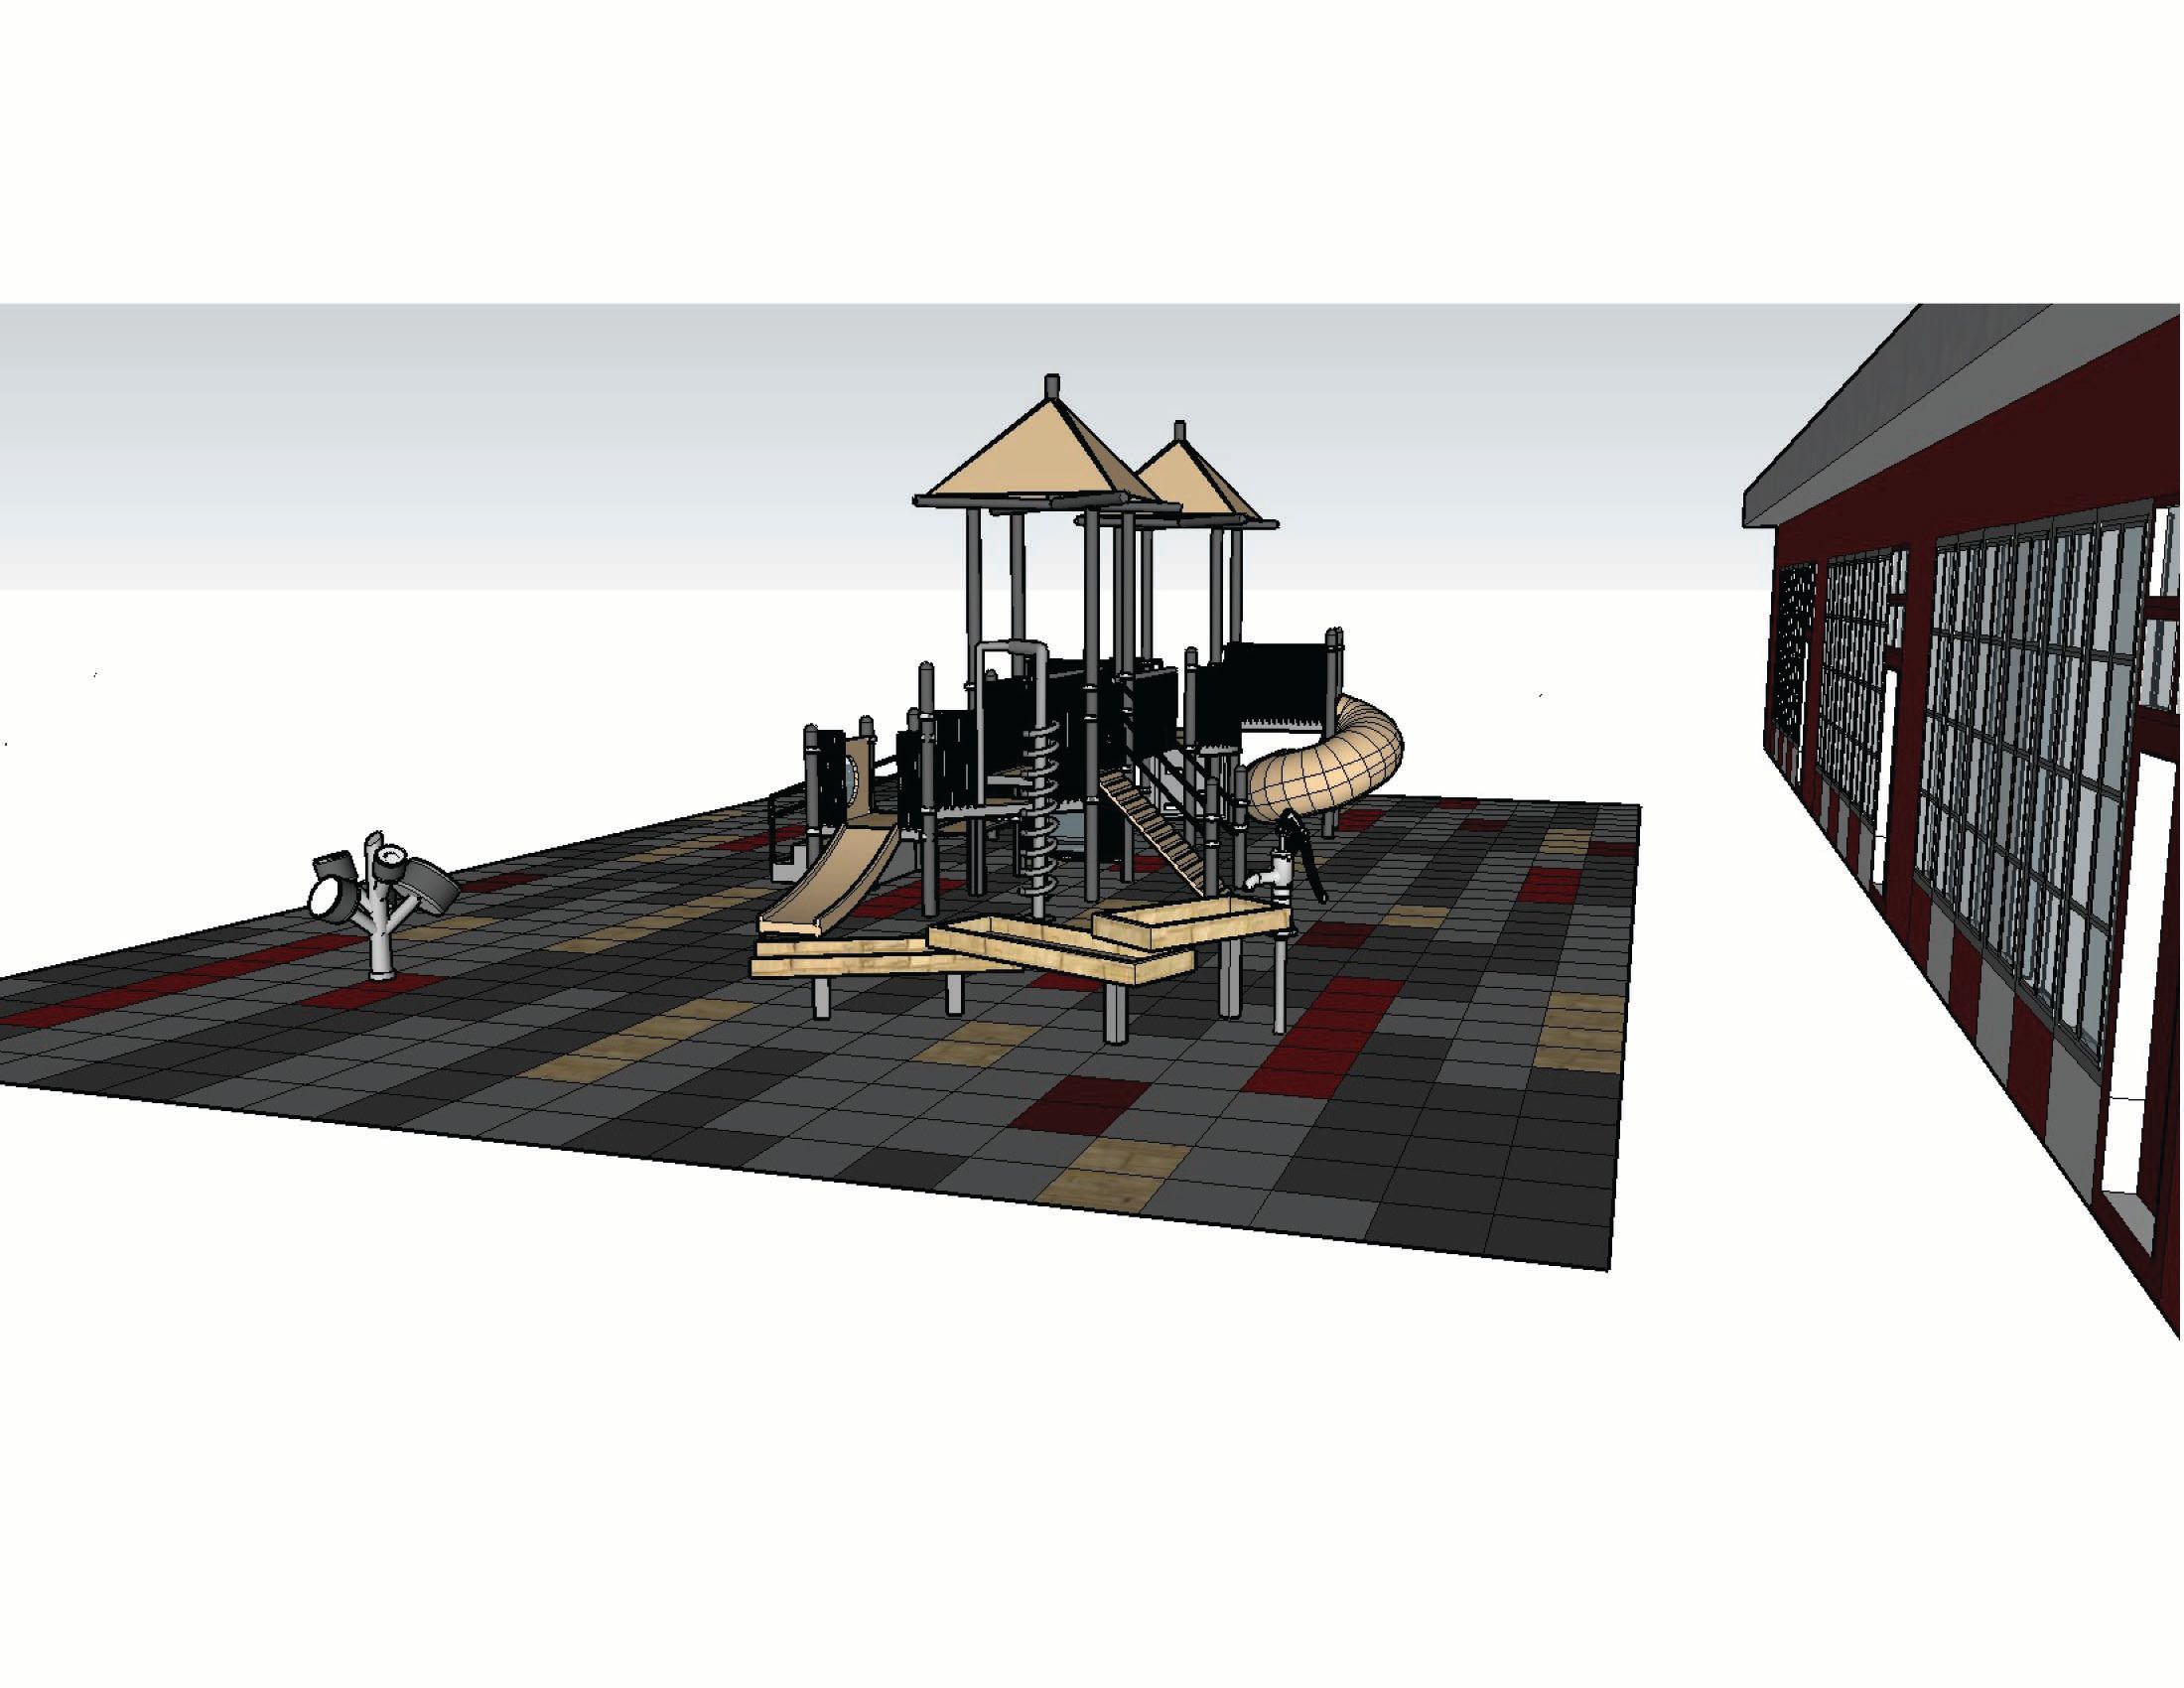 UNITY = Playground Tile Design with Play Structure inserted